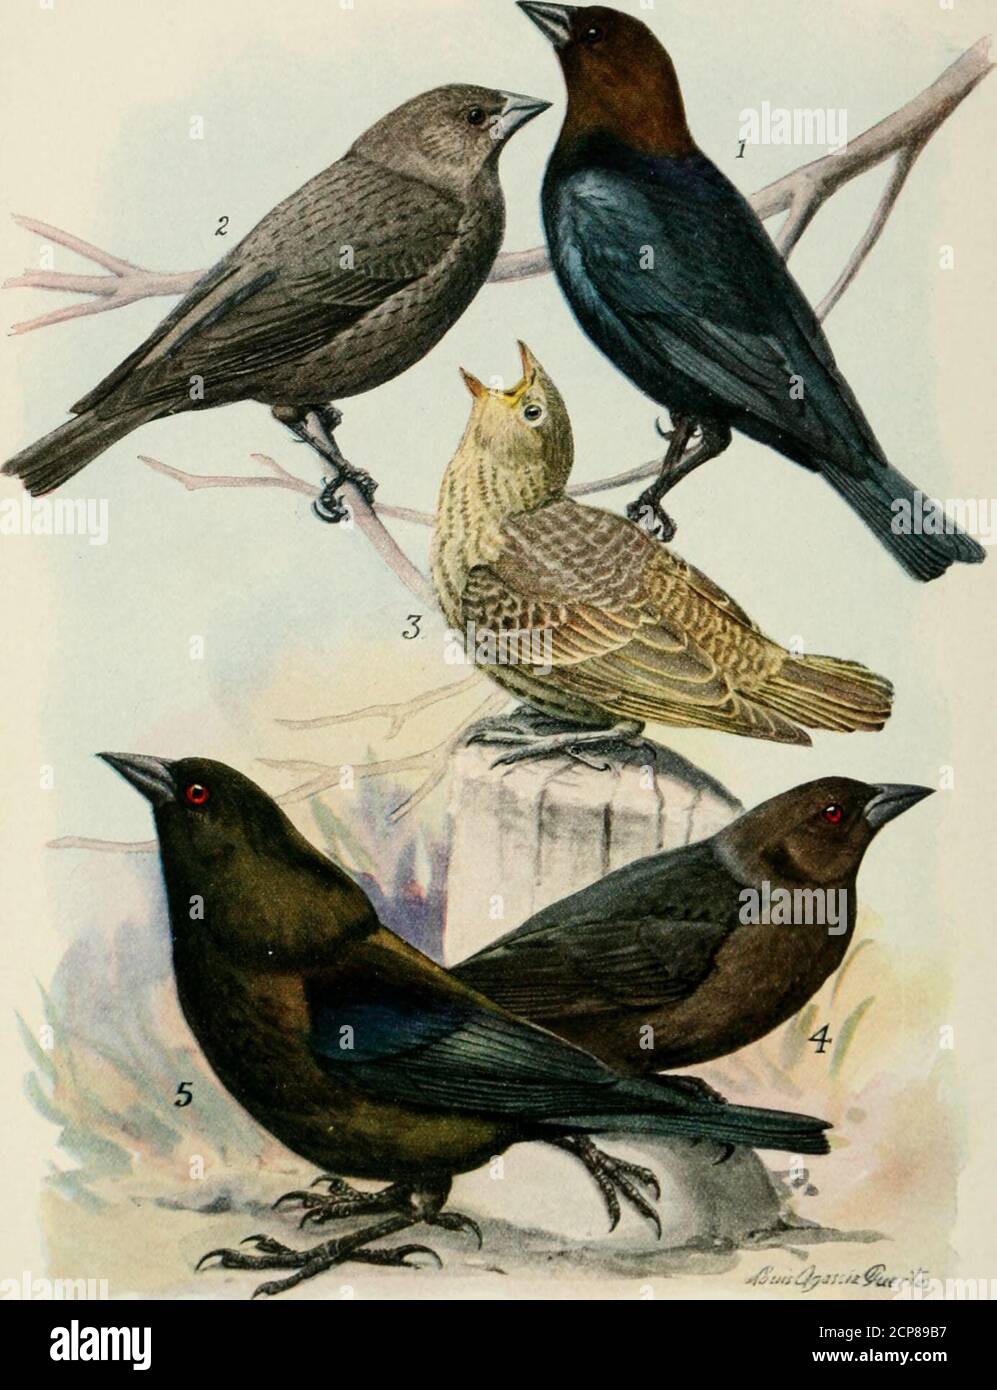 . Bird-lore . C.Werner, Mrs. Henrv C.White, N. G.Willson, Alfred L.Zalk, LouisZucker, Mrs. A. JOIN THIS ASSOCIATION AND HELP THE CAUSE OK BIRD PROTECTION! - «a*l .... i £ The Educational Leaflets OF THE National Association ofAudubon Societies (Q[ iThe best means of learning the birds of yourneighborhood, and ot teaching your children.(D, Each leaflet describes the habits and utility ofone bird, and contains a detached colored plate andan outline sketch of its subject. dl. The Colored Plates are faithful portraits of thebirds, yet treated artistically, as is shown by the ex-amples in the borde Stock Photo